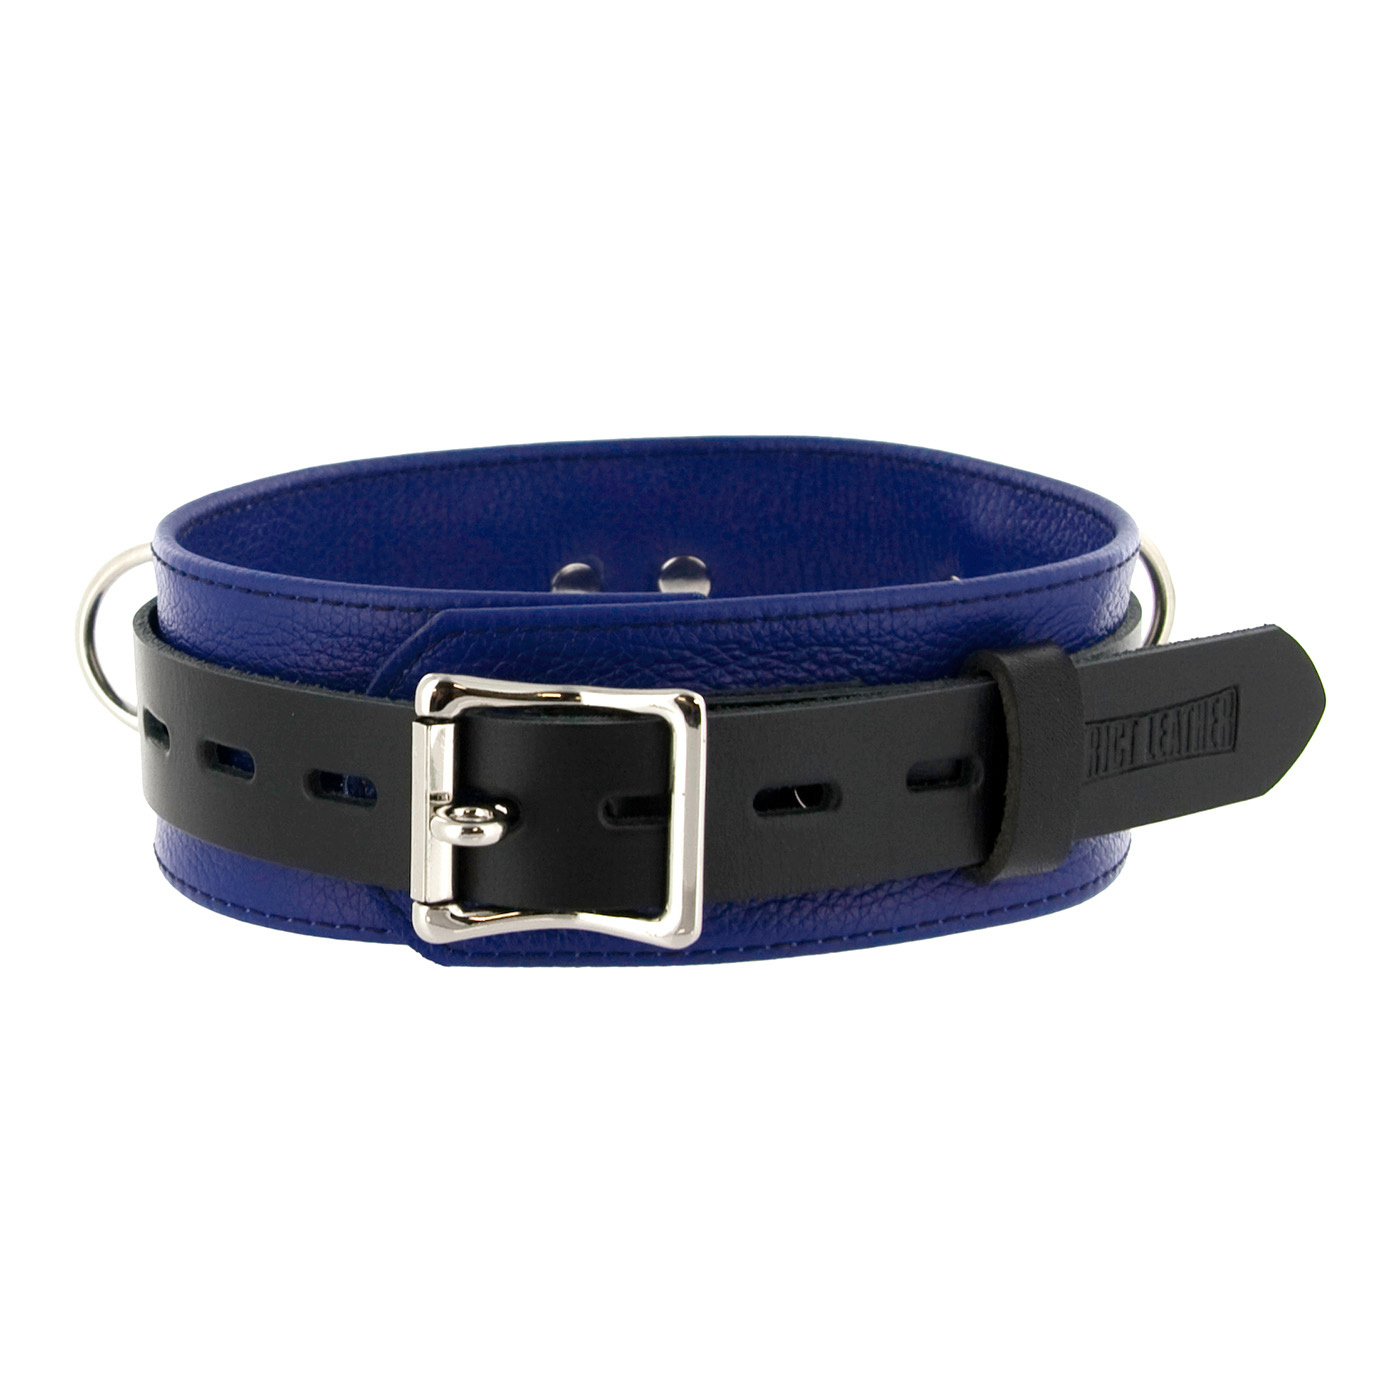 Strict Leather Deluxe Locking Collar – Blue and Black